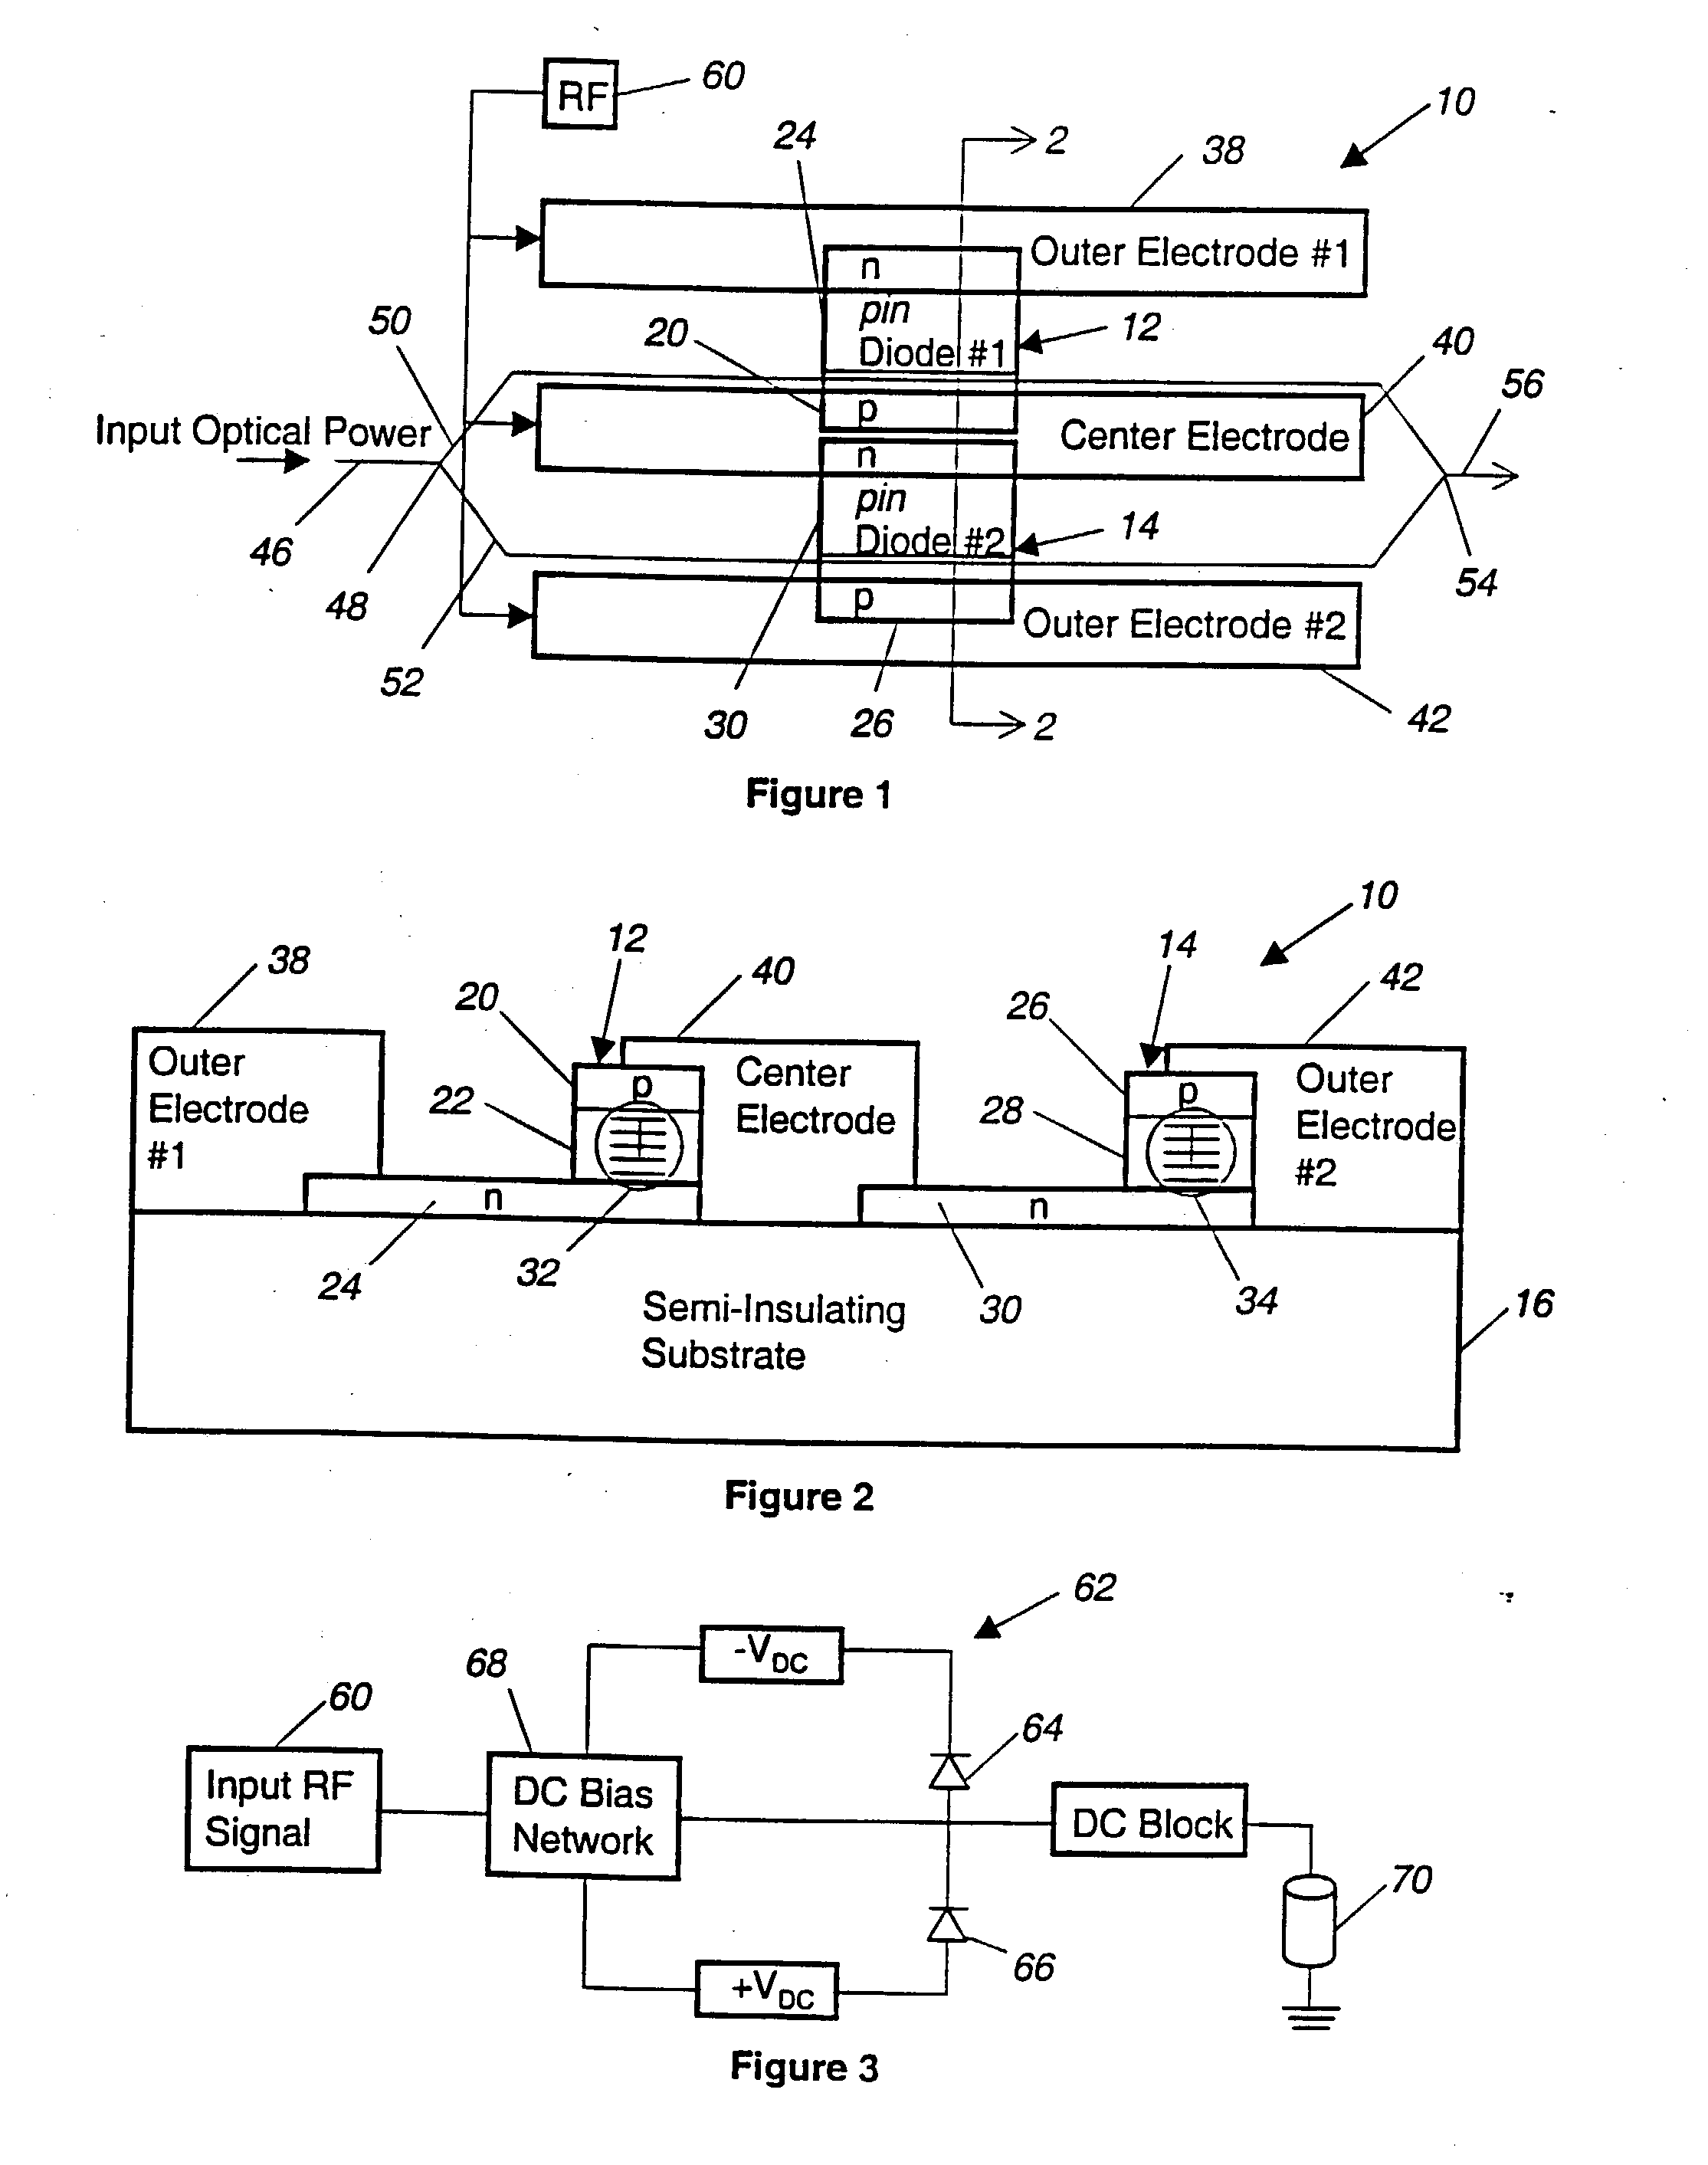 Single-electrode push-pull configuration for semiconductor PIN modulators